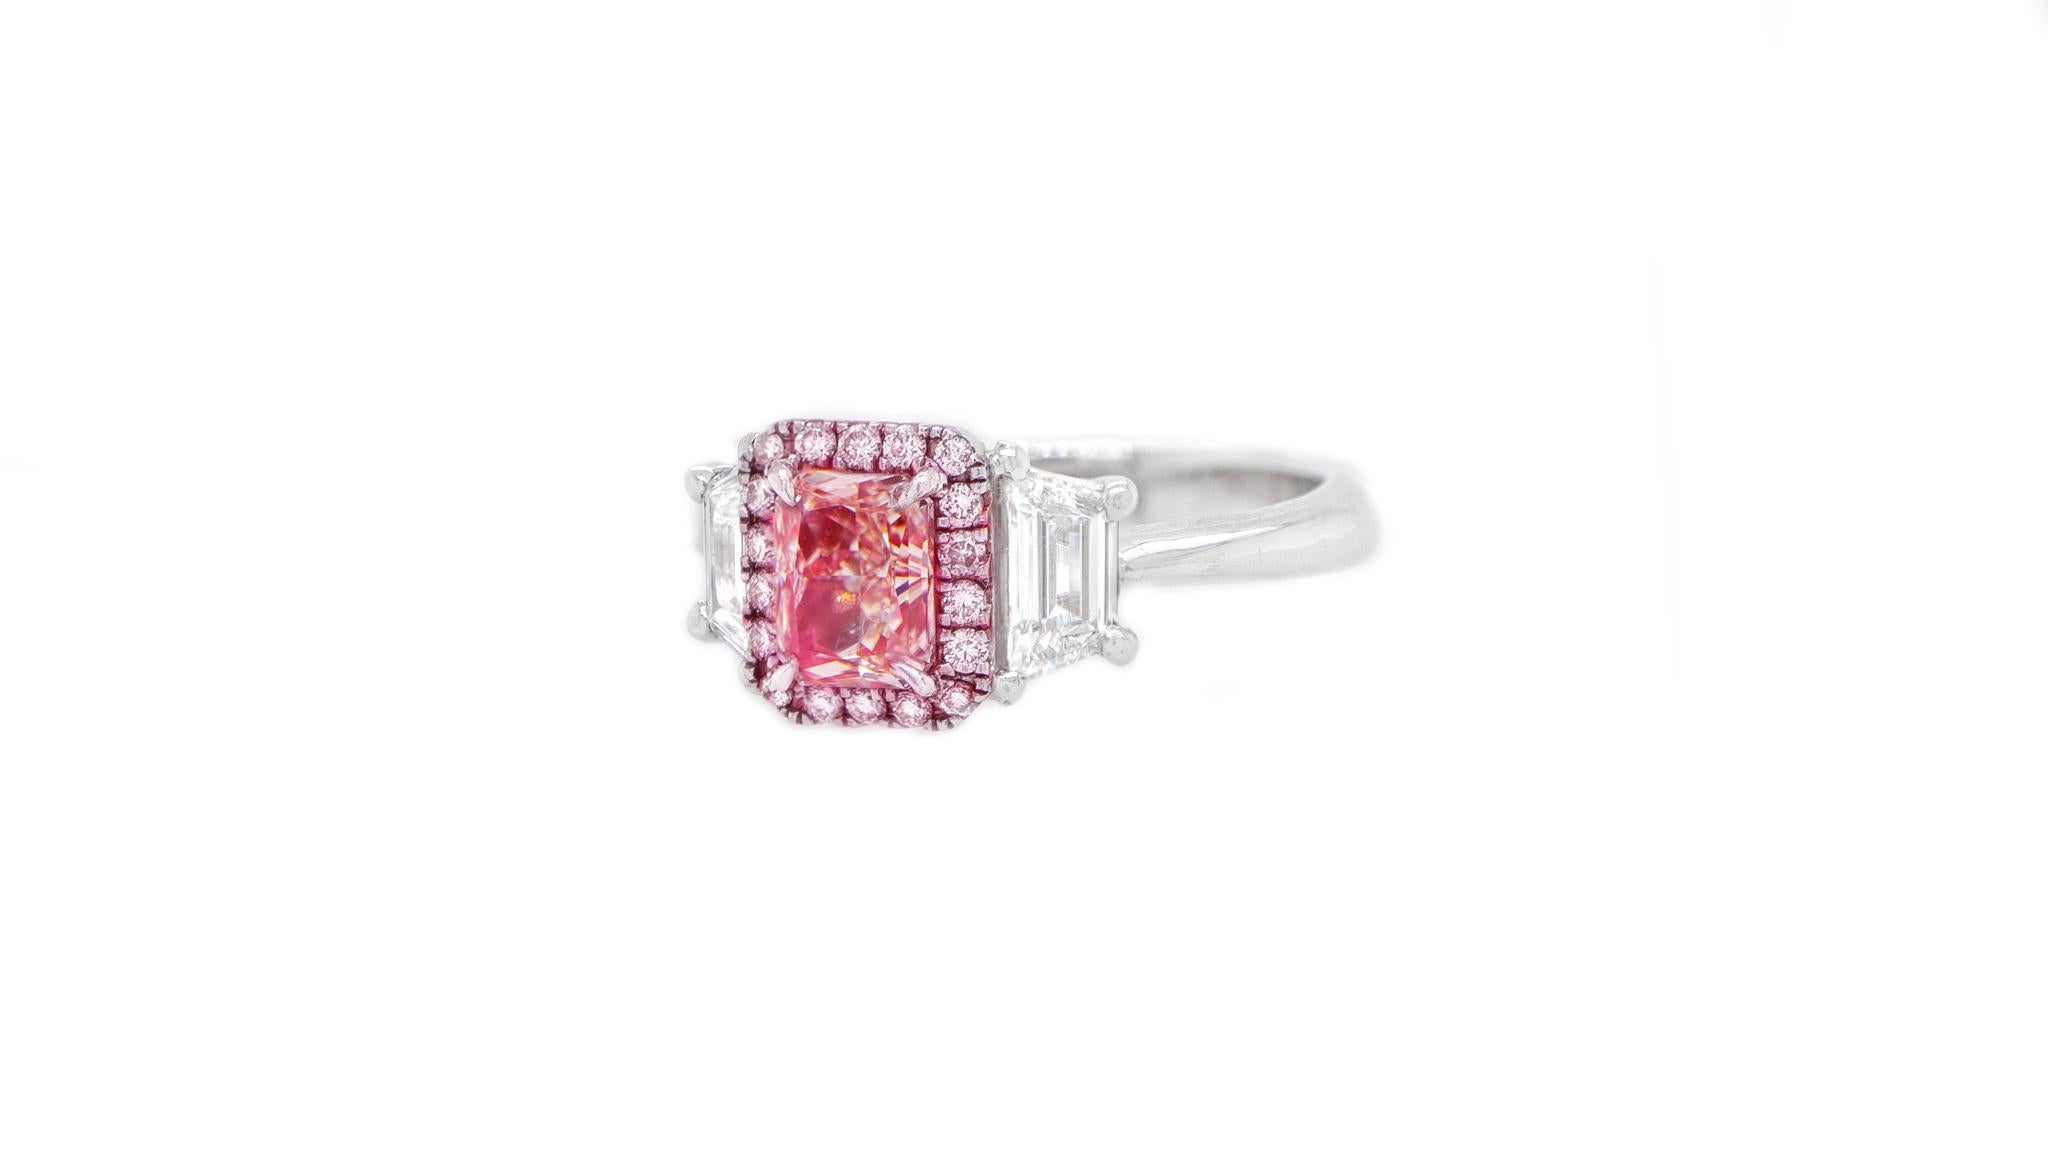 EGL Certified Pink Diamond 0.68 Carat Ring with Pink Diamond Halo 18K Gold In Excellent Condition For Sale In Carlsbad, CA